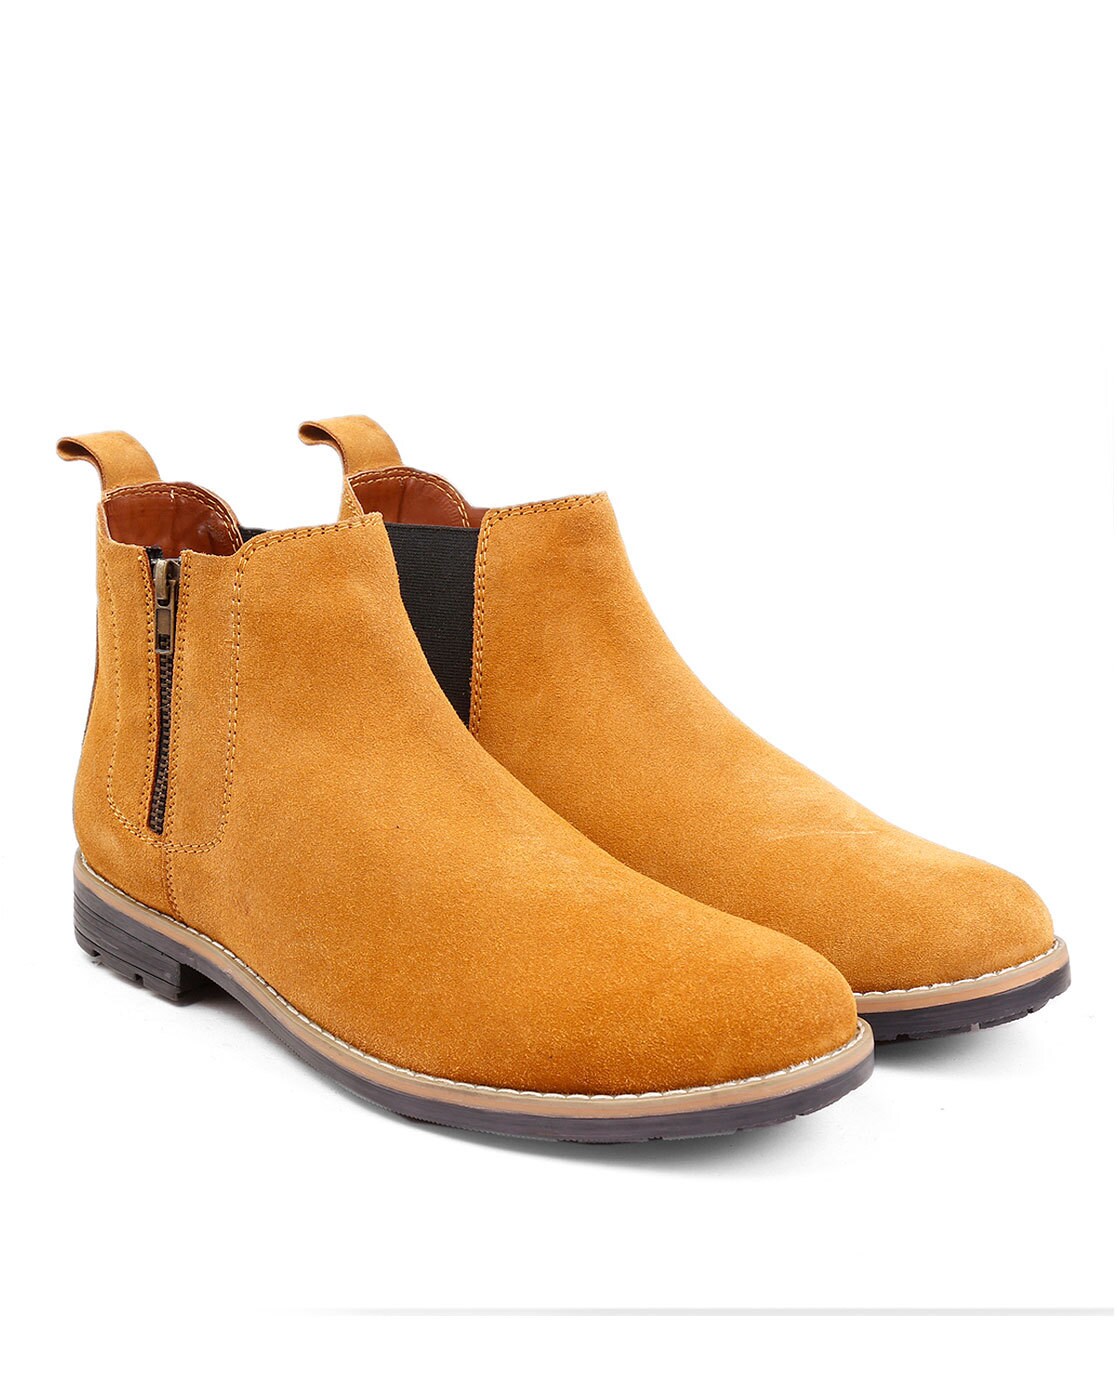 Buy Tan Boots for Men by BACCA BUCCI 